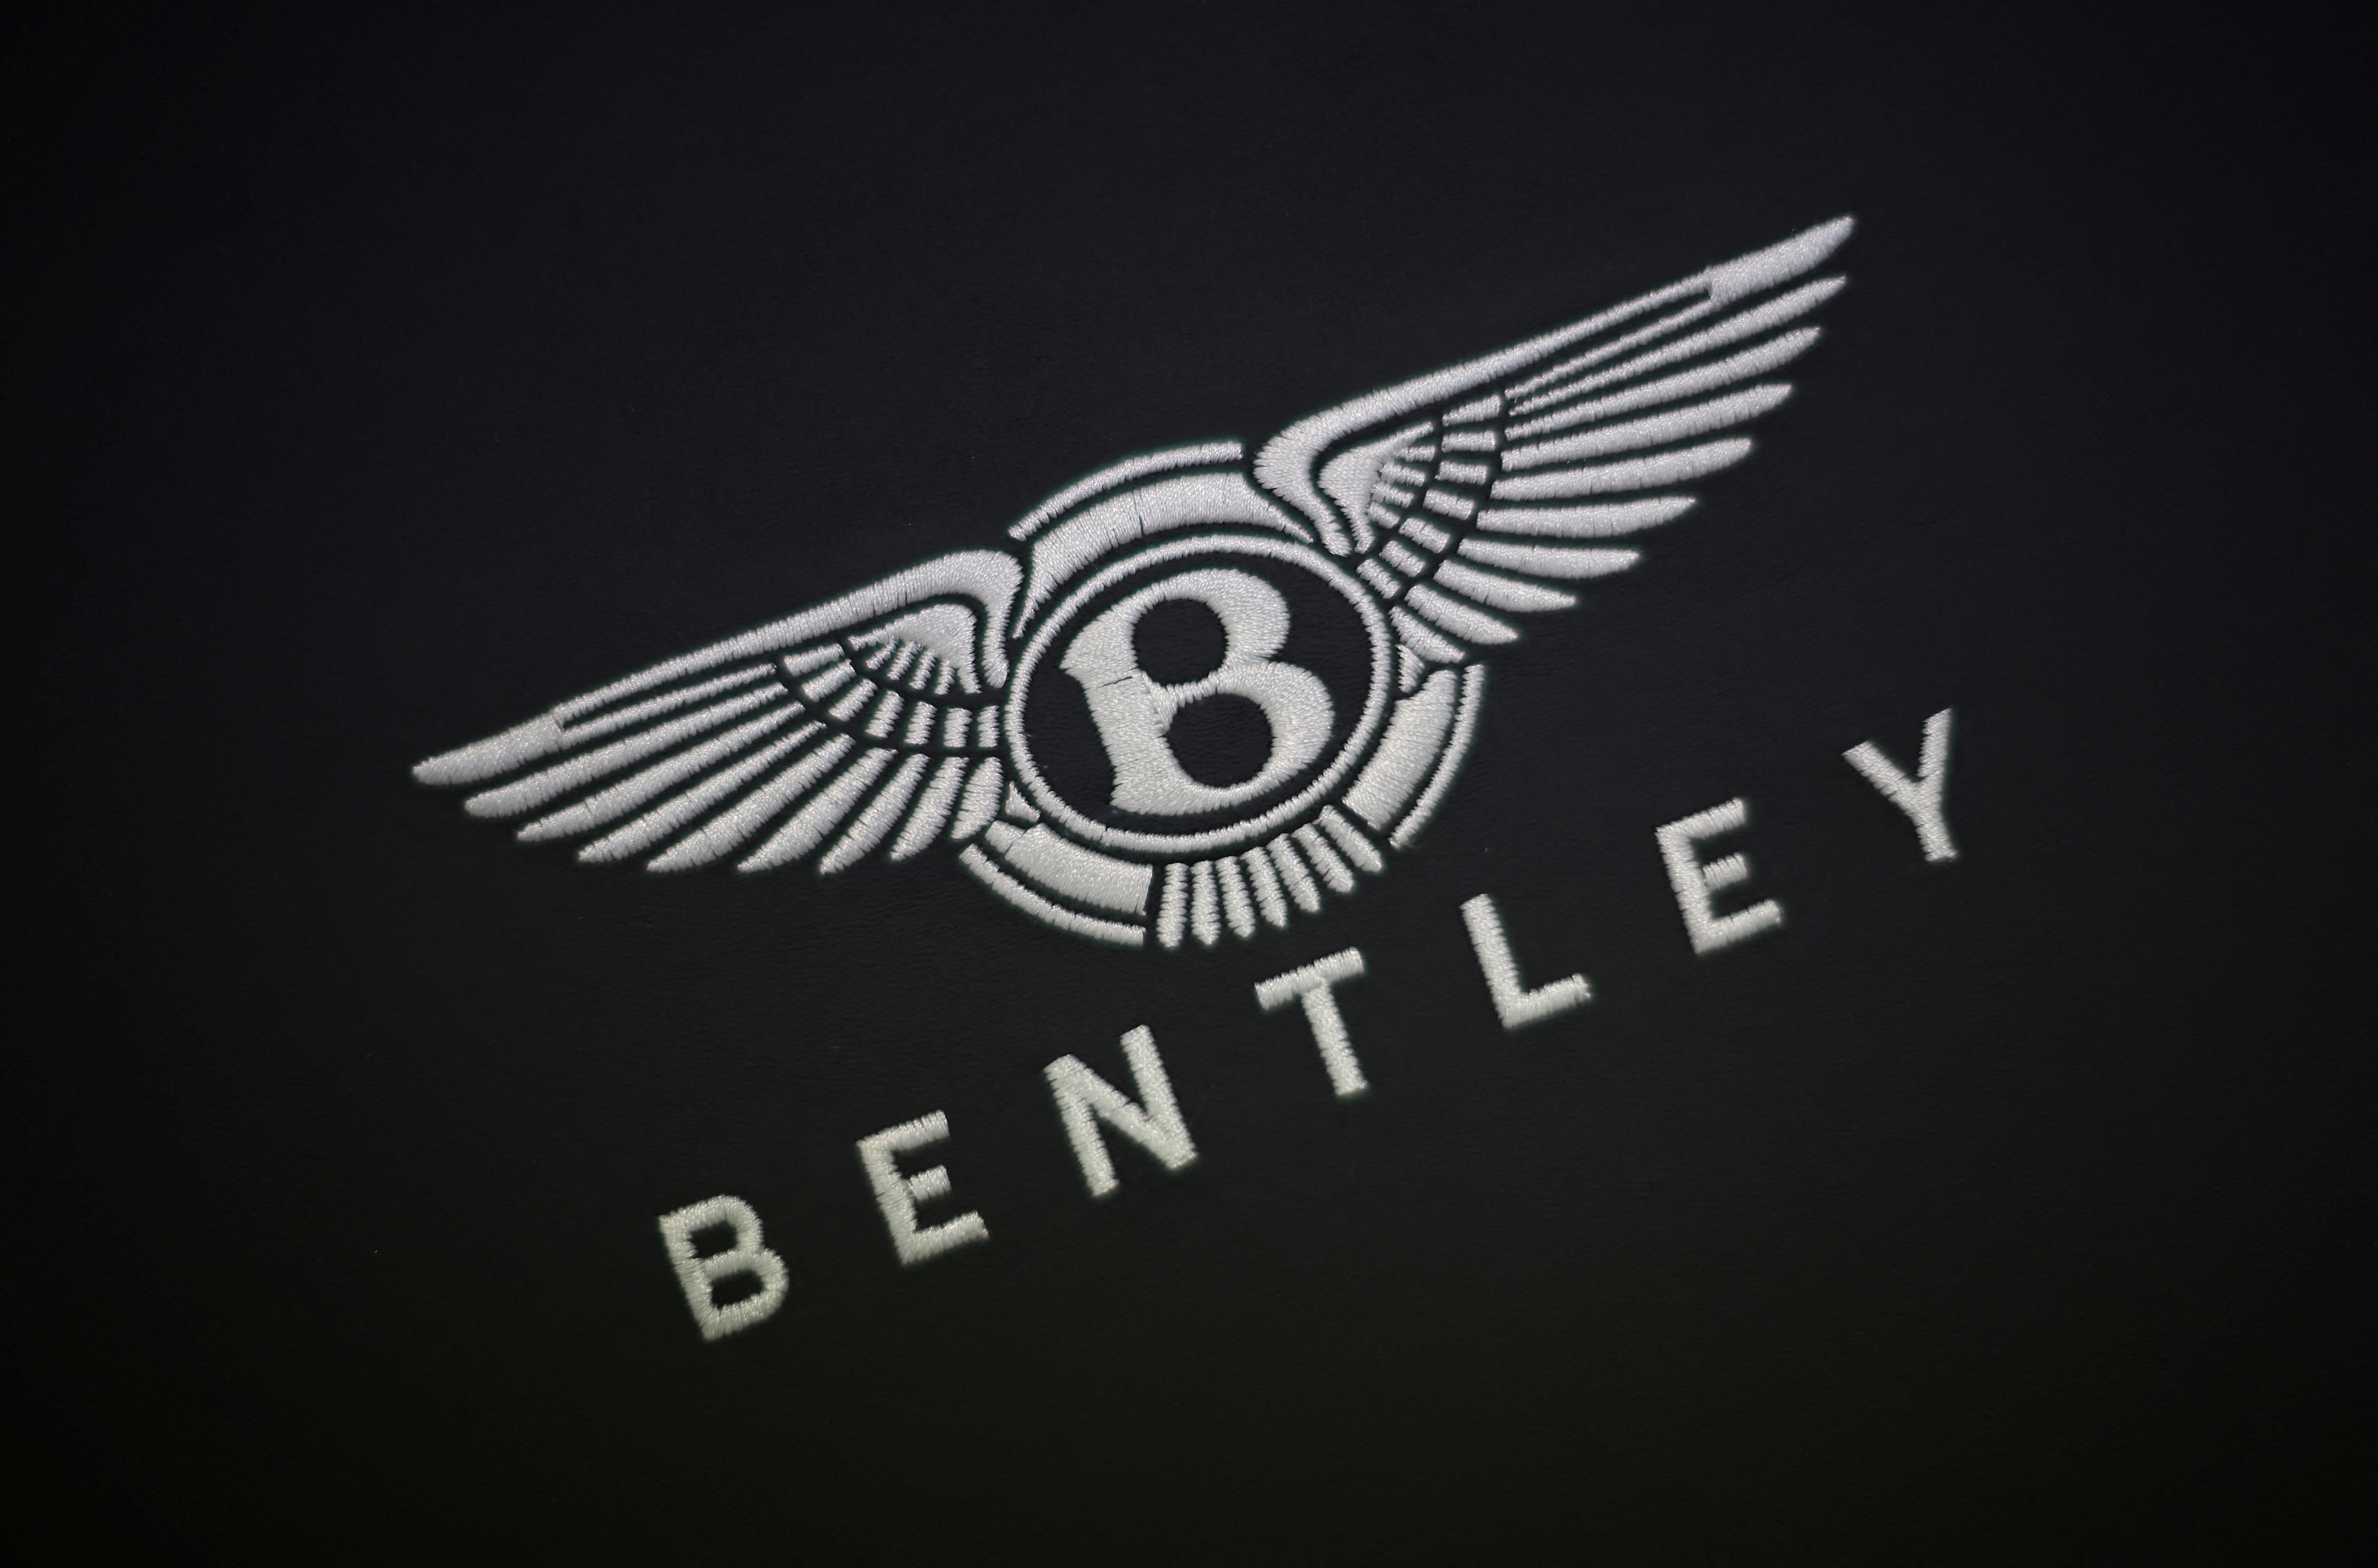 A company logo is seen stitched to a piece of leather inside the Bentley factory in Crewe